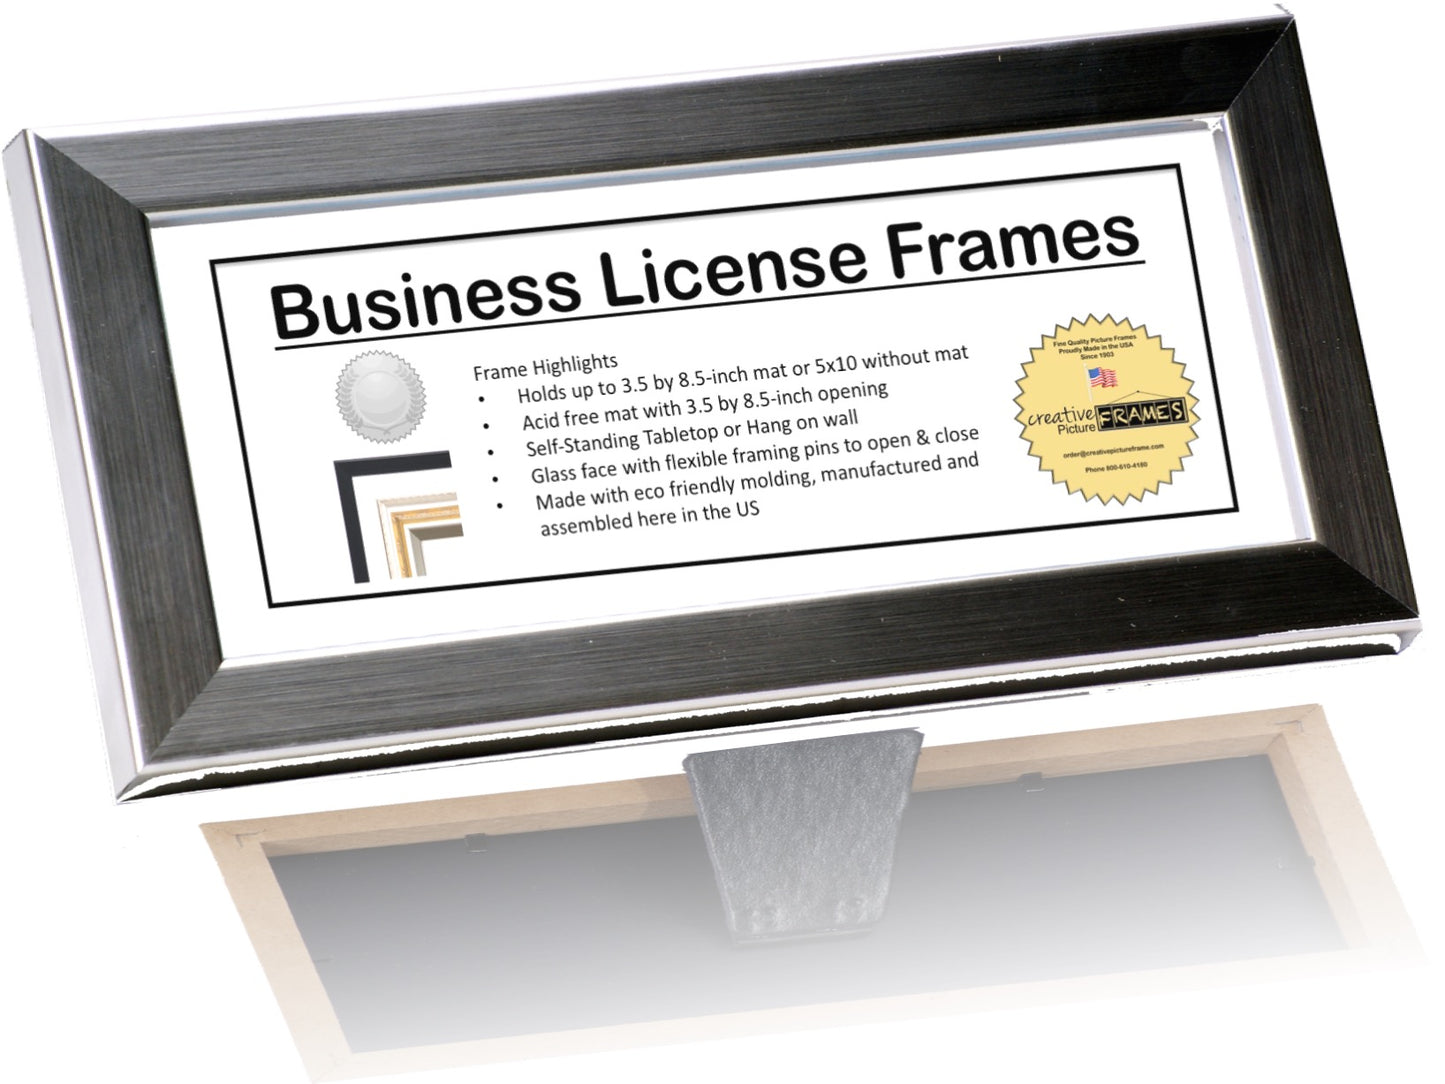 3.5x8.5 License Frame with Mat